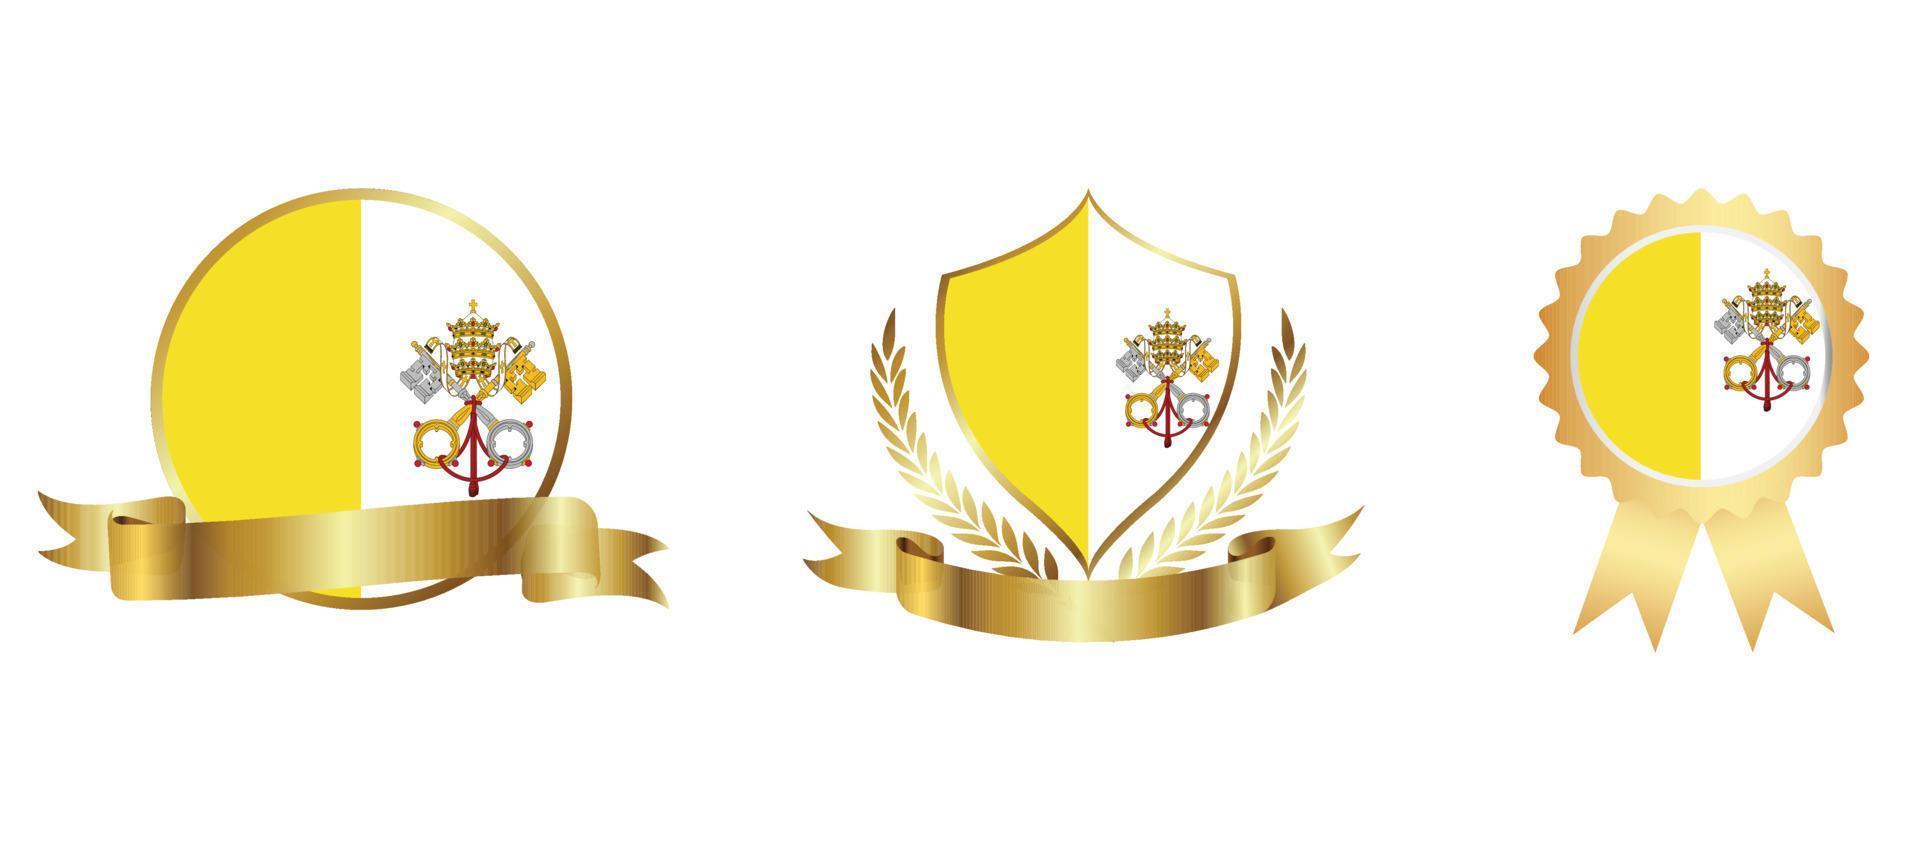 Vatican City Holy See flag icon . web icon set . icons collection flat. Simple vector illustration.